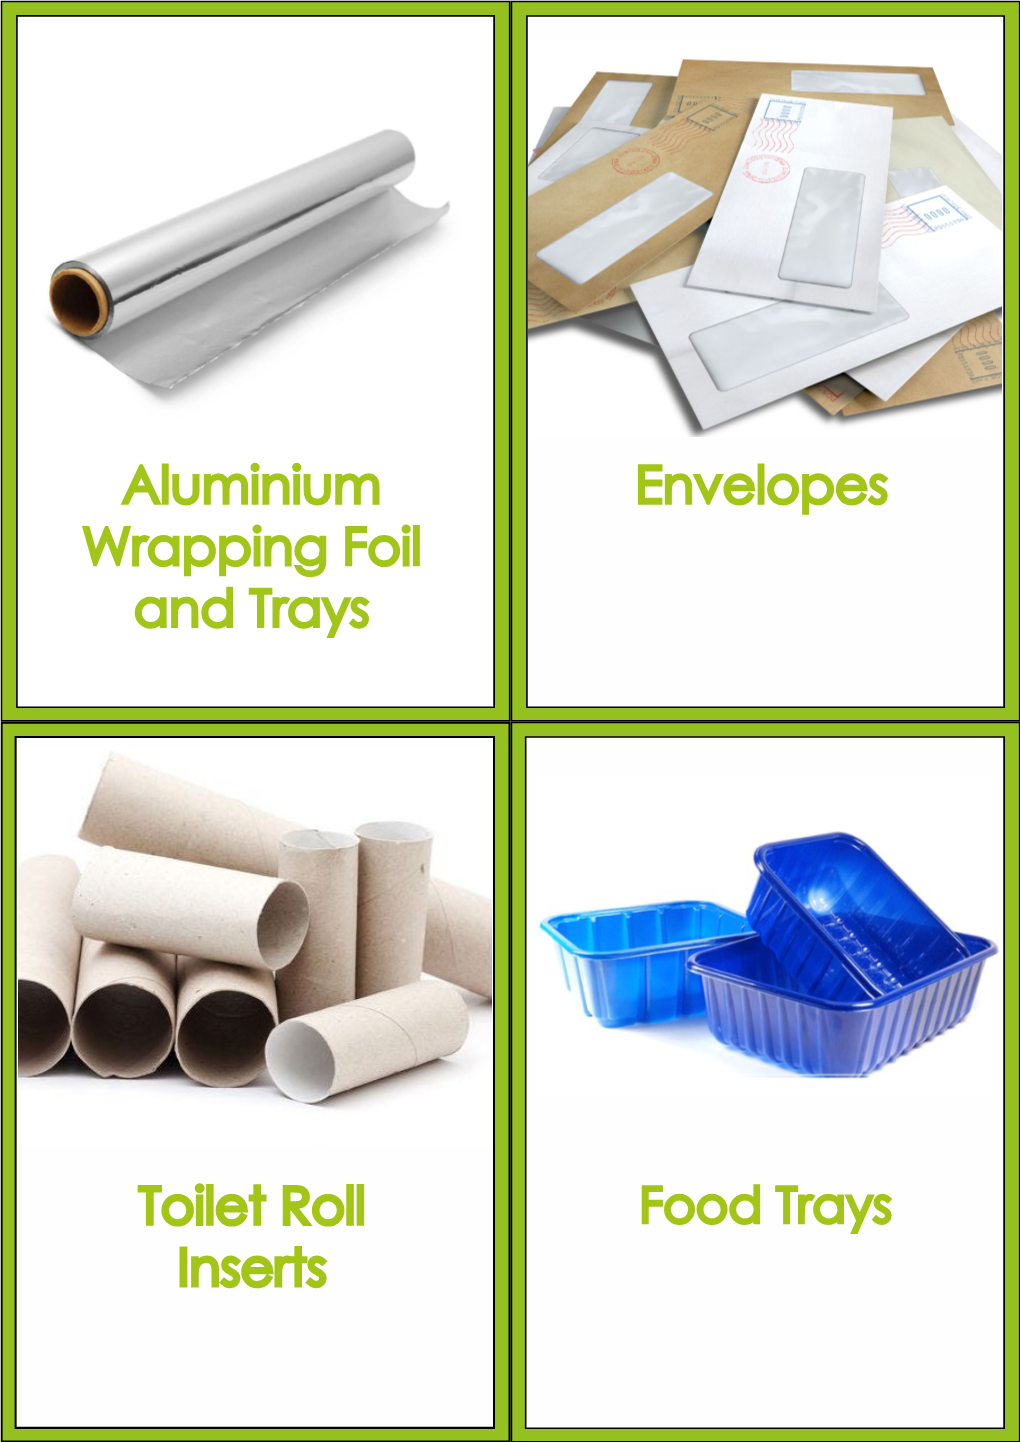 Aluminium Wrapping Foil and Trays Envelopes Toilet Roll Inserts